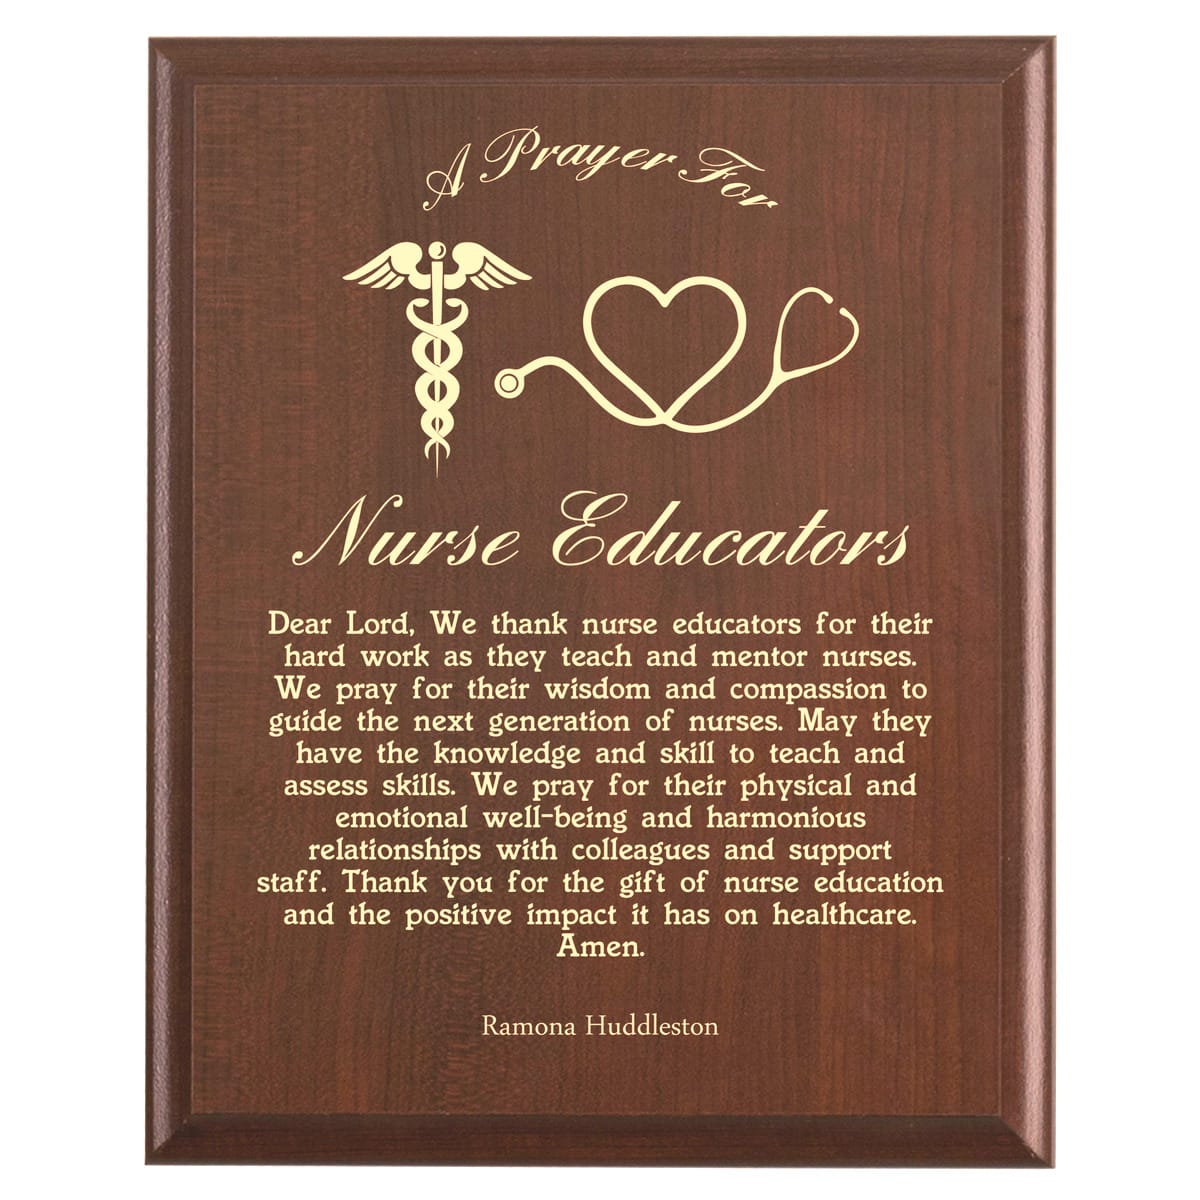 Plaque photo: Nurse Educators Prayer Plaque design with free personalization. Wood style finish with customized text.